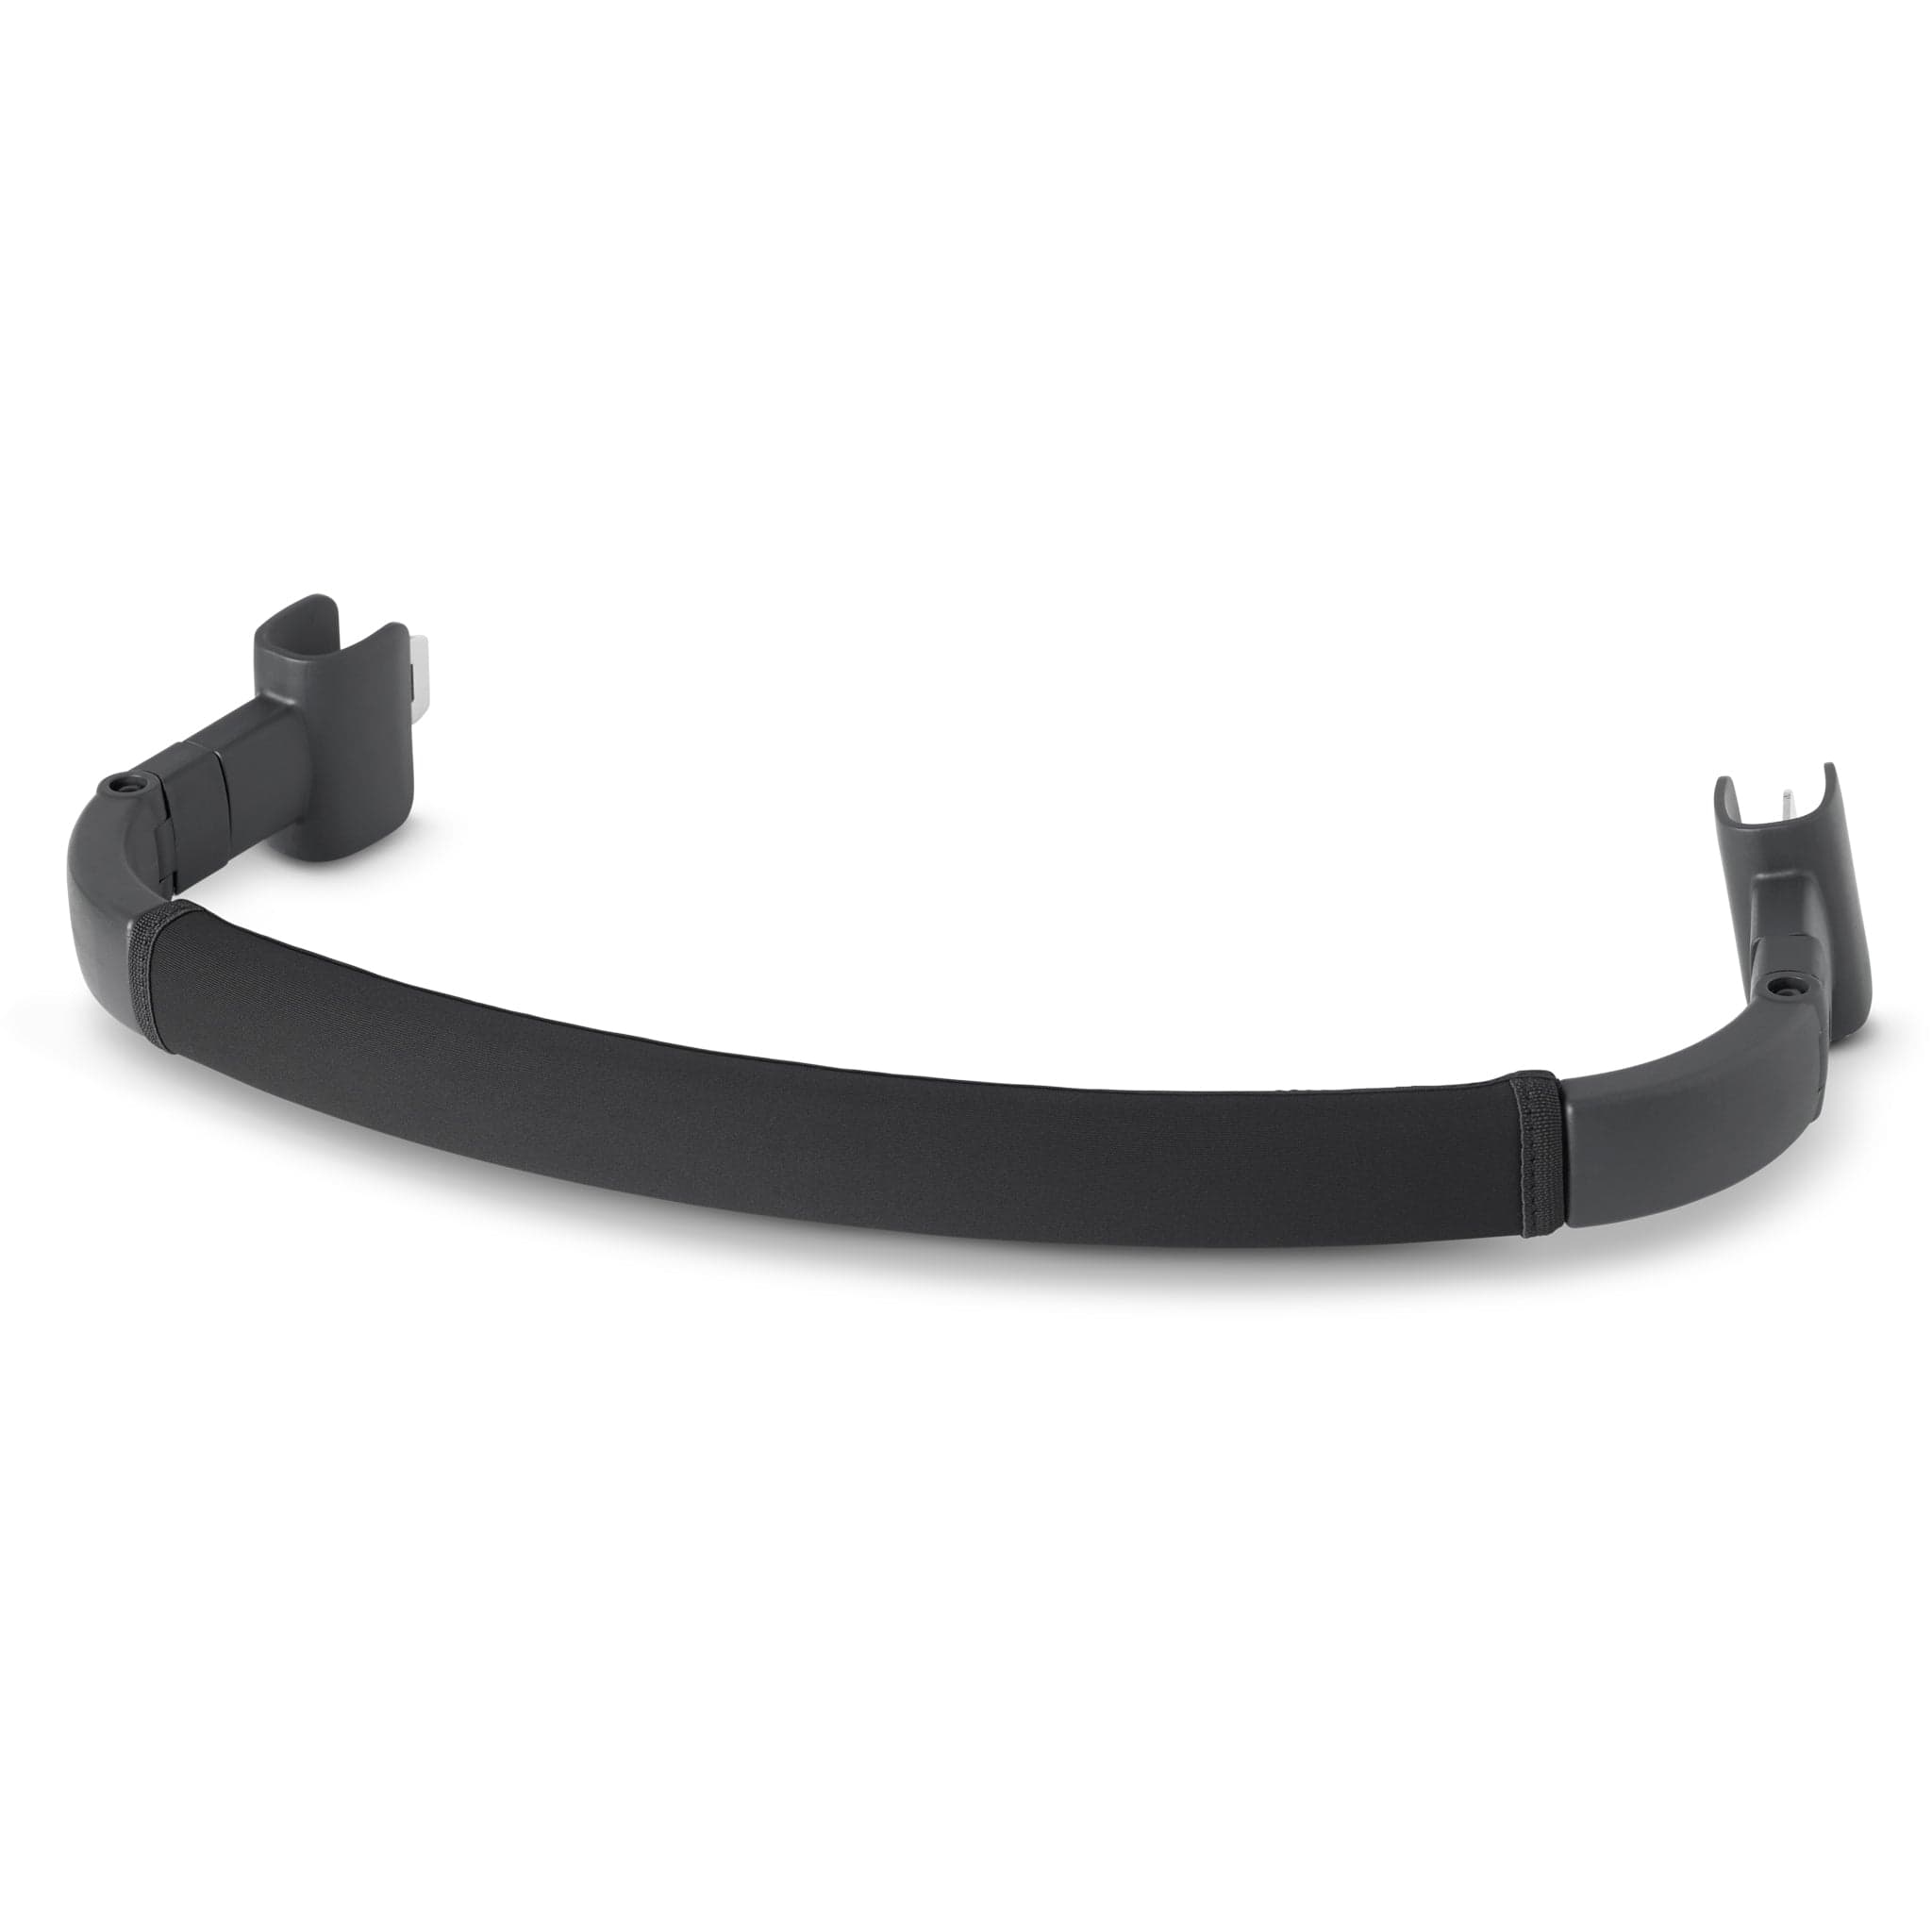 Uppababy buggy accessories UPPAbaby Ridge Bumper Bar 0901-RBB-WW